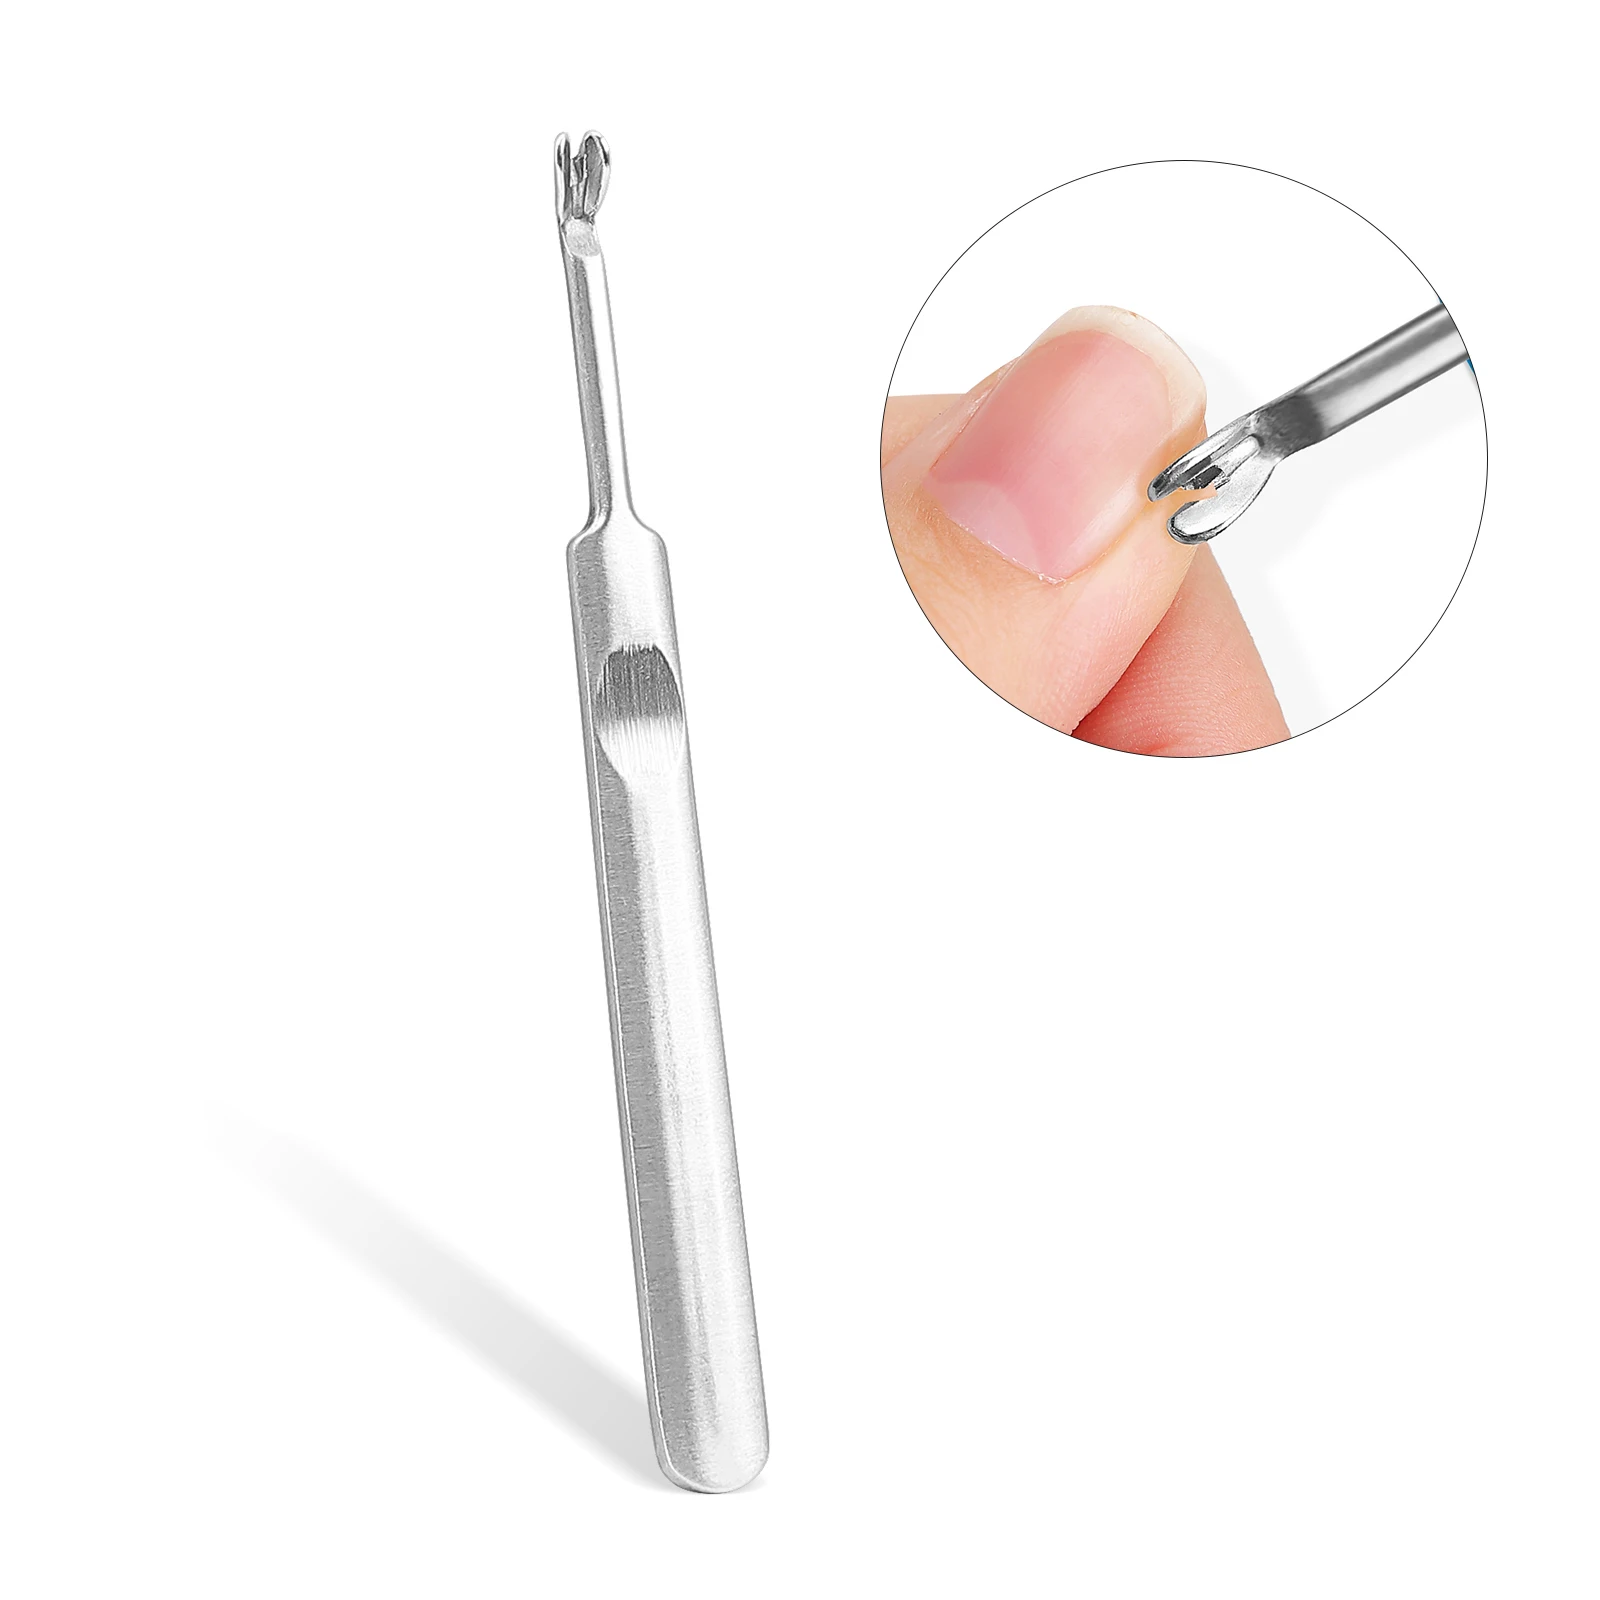 

Nail Manicure Professional Stainless Steel Cuticle Pusher Trimmer Dead Skin Remover Nail File Buffer Sanding Grinding